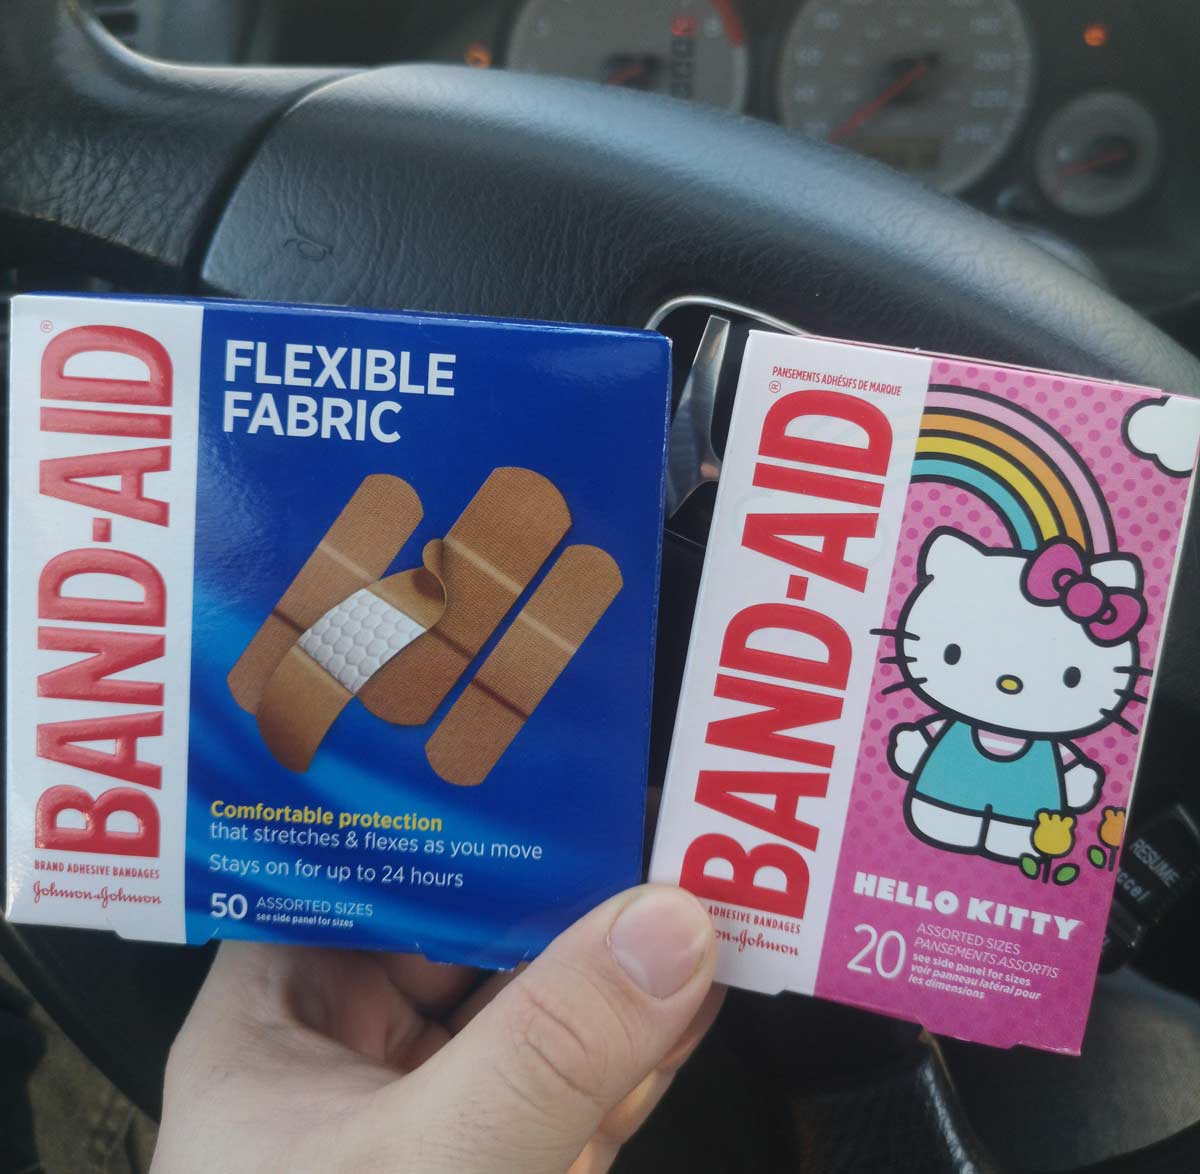 Bandaid refill: some for me, and the ones I'll give buddies who don't have any but need one